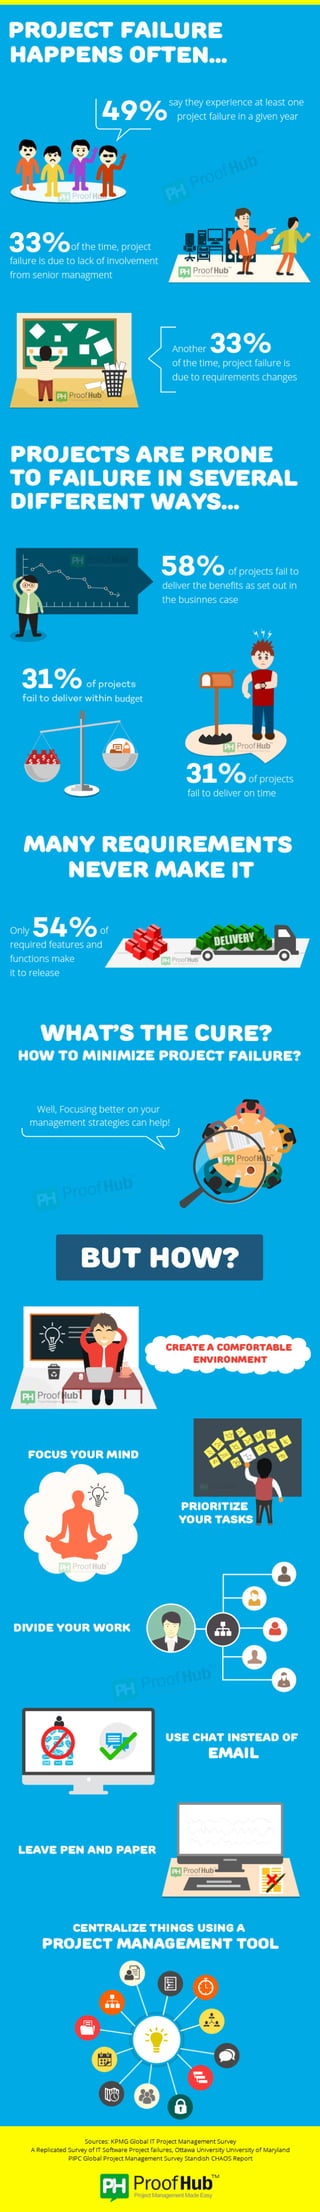 How to minimize project failure? 